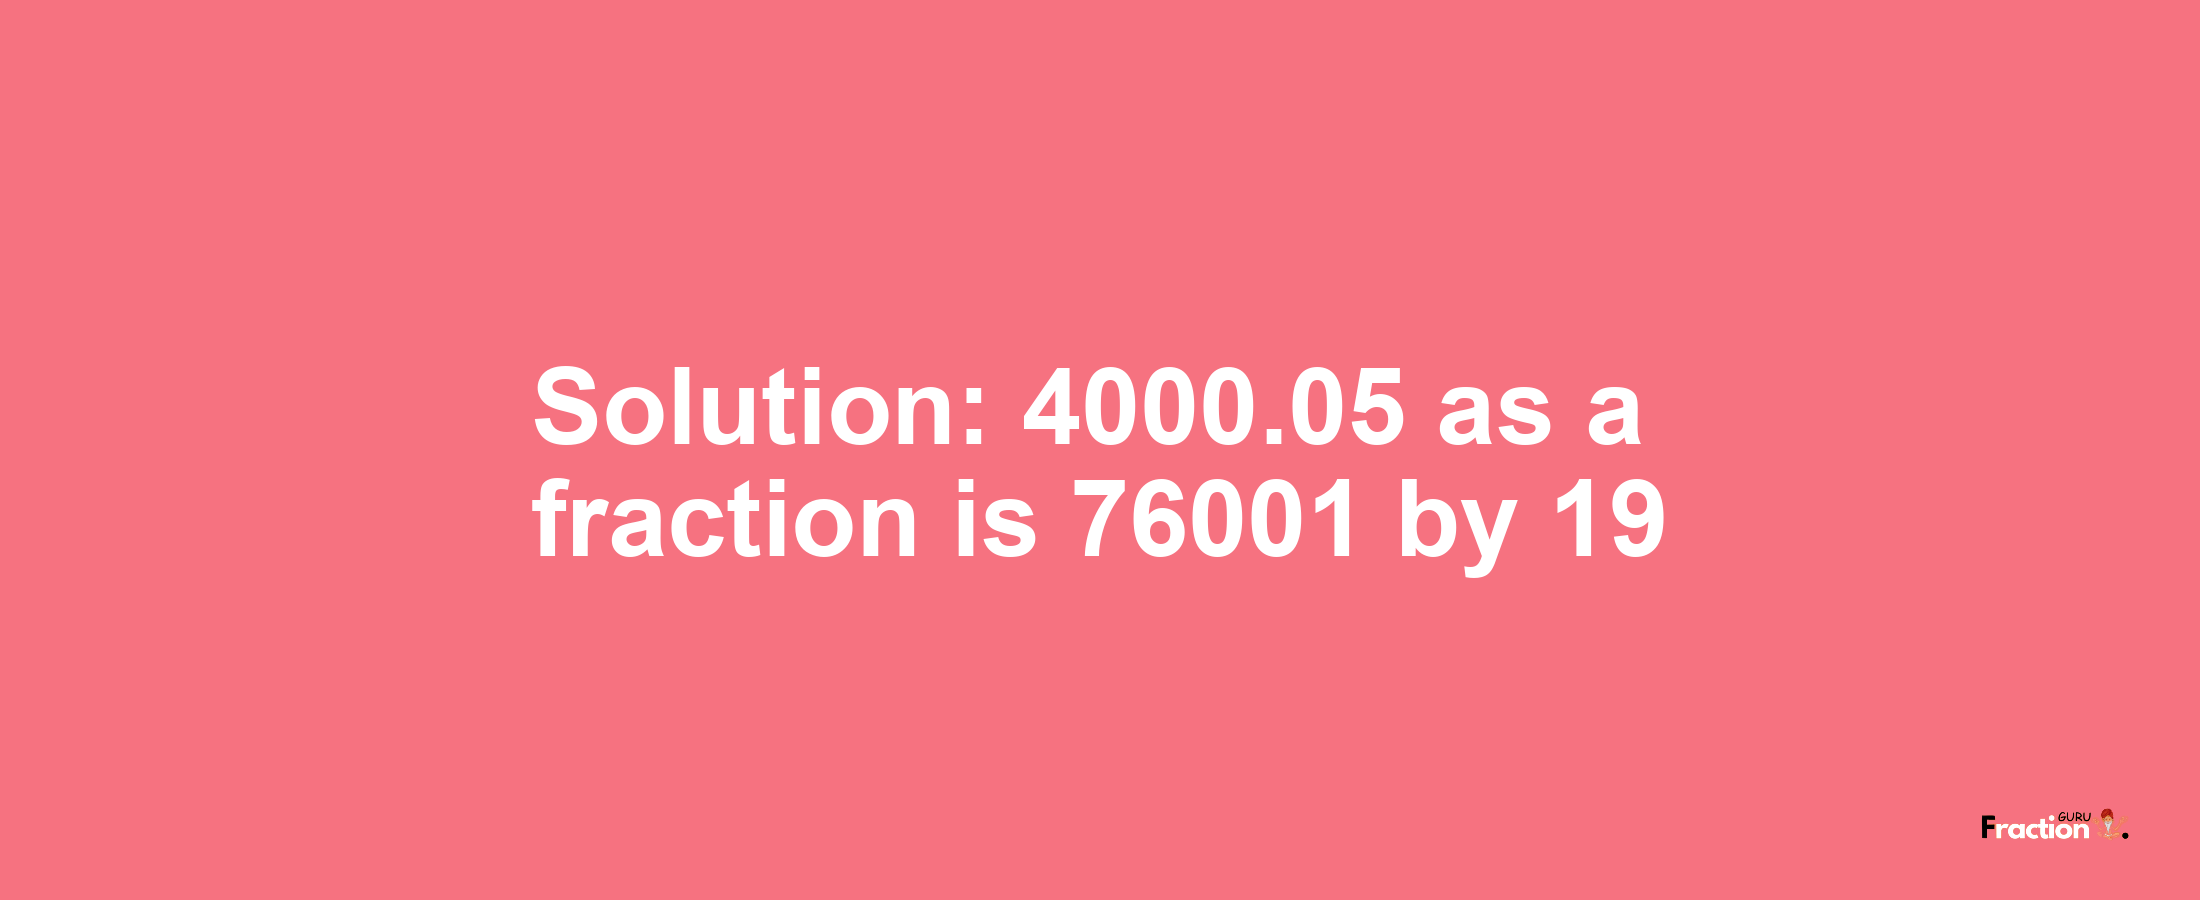 Solution:4000.05 as a fraction is 76001/19